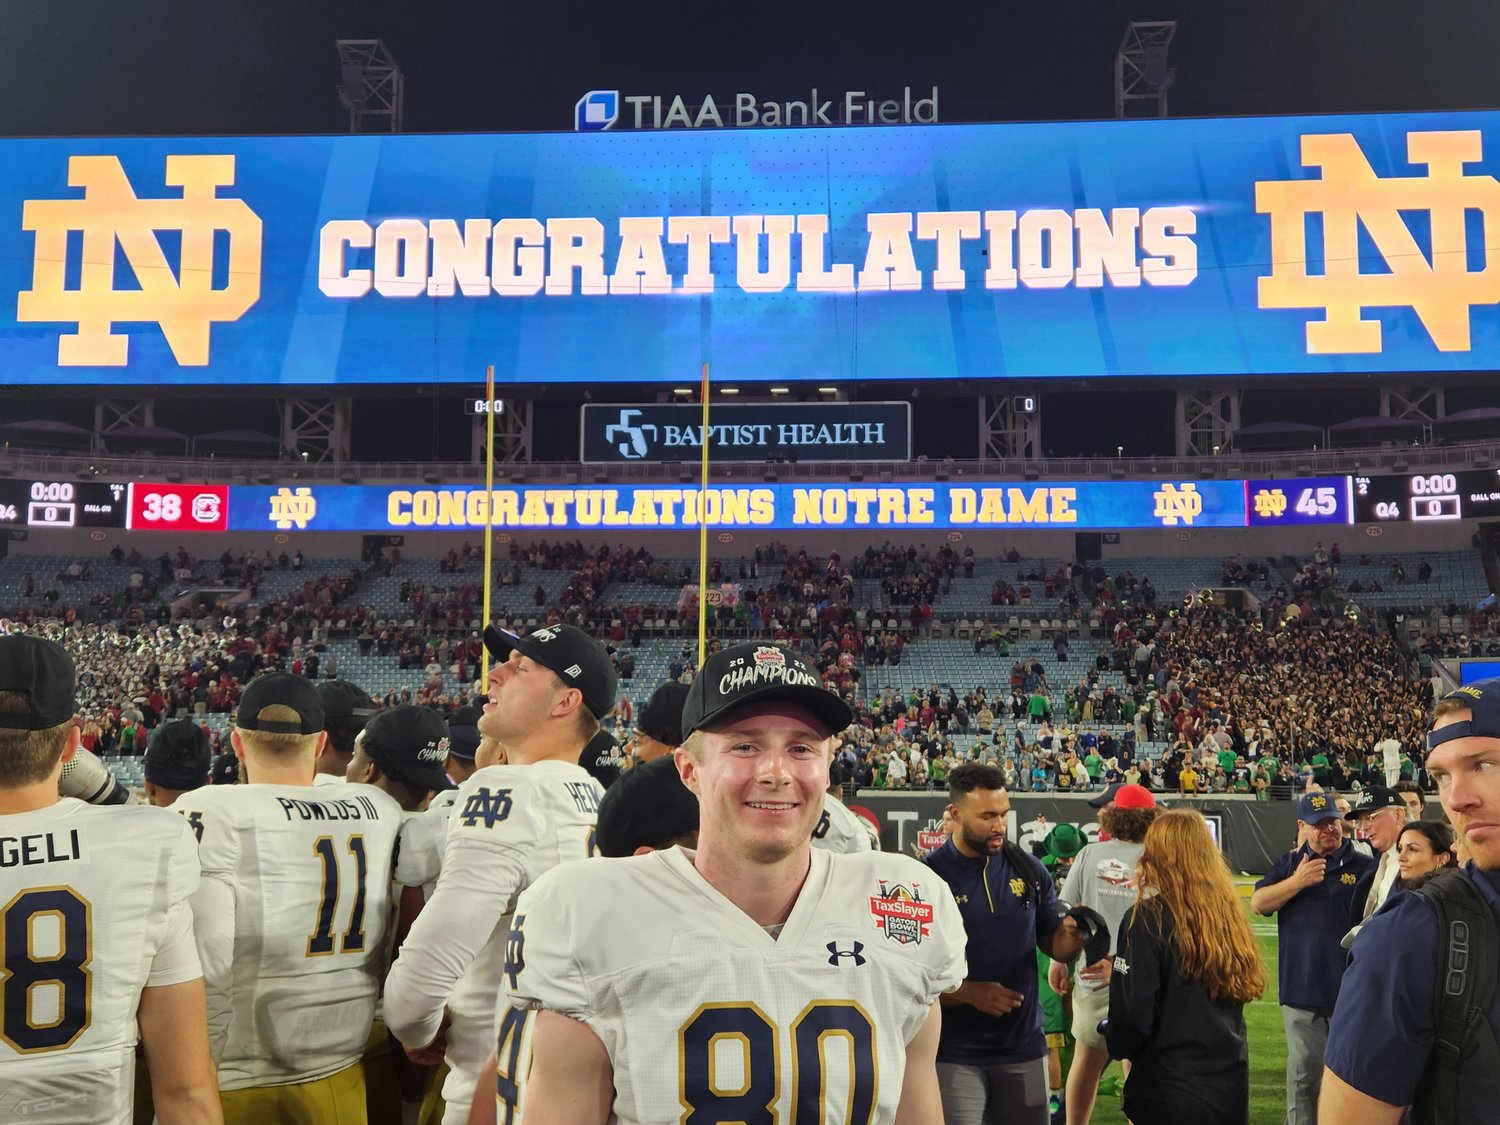 Ponte Vedra High alum Jack Polian won the 78th Annual Gator Bowl as a member of the Notre Dame Fighting Irish.